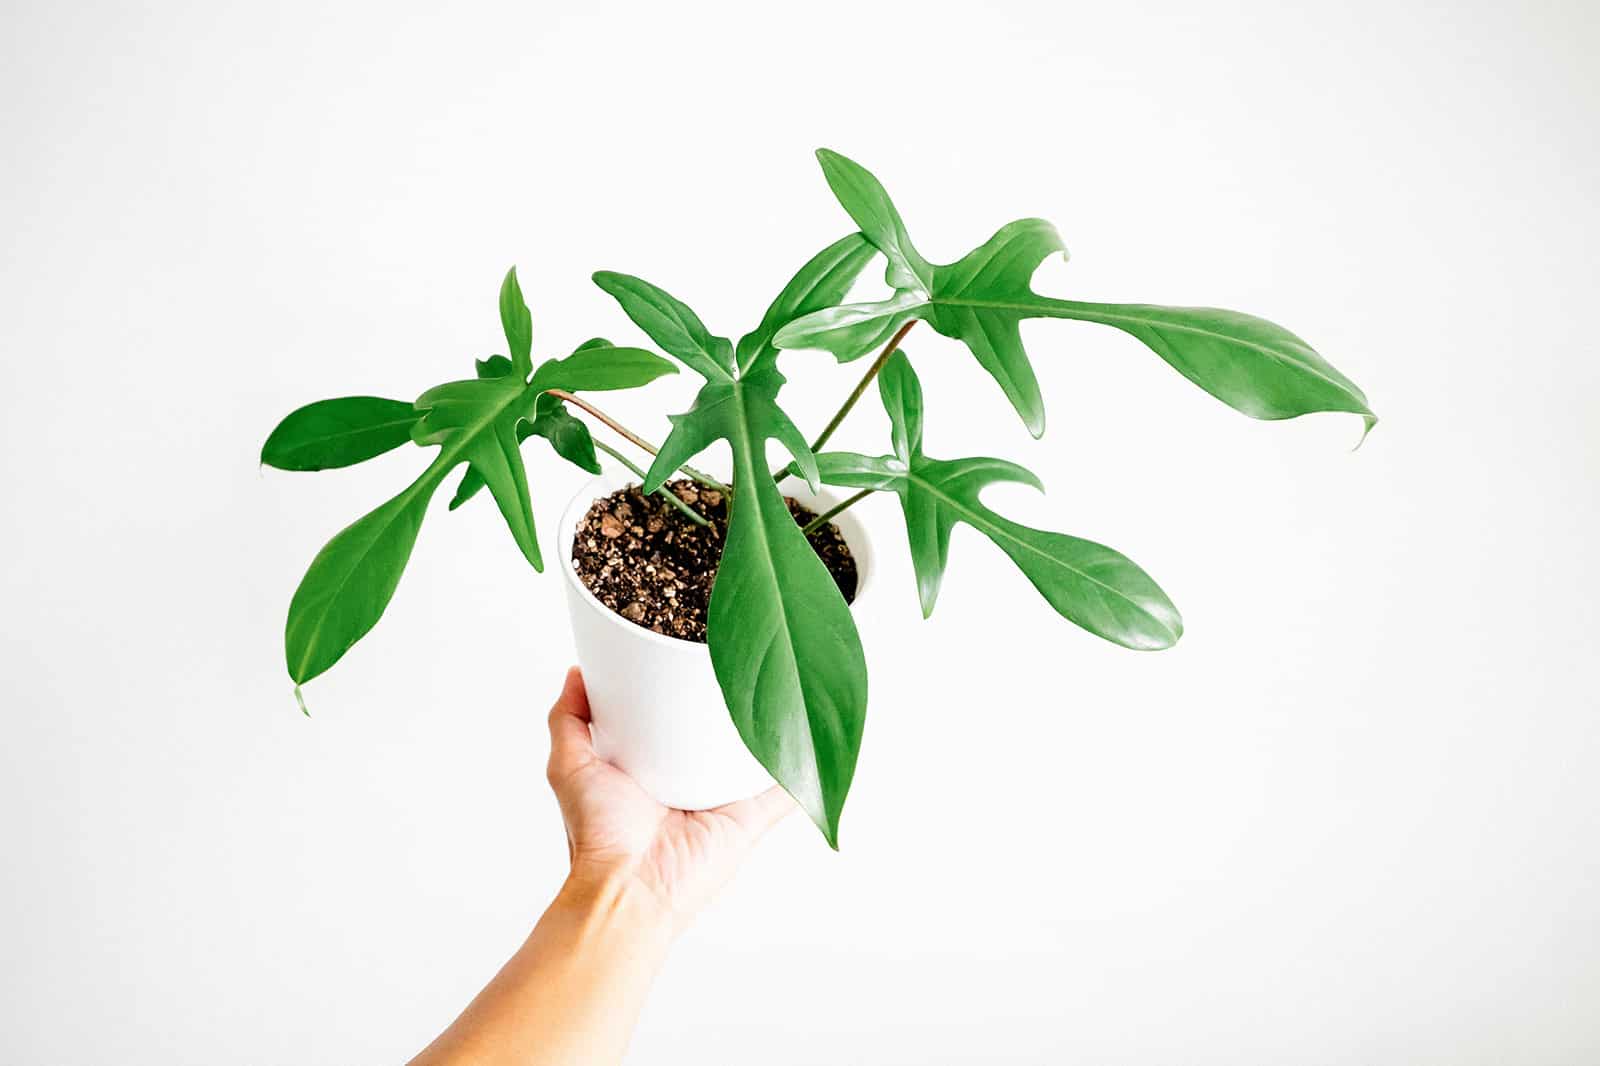 A hand holding a small Philodendron 'Florida' houseplant in a white pot, shot against a white background